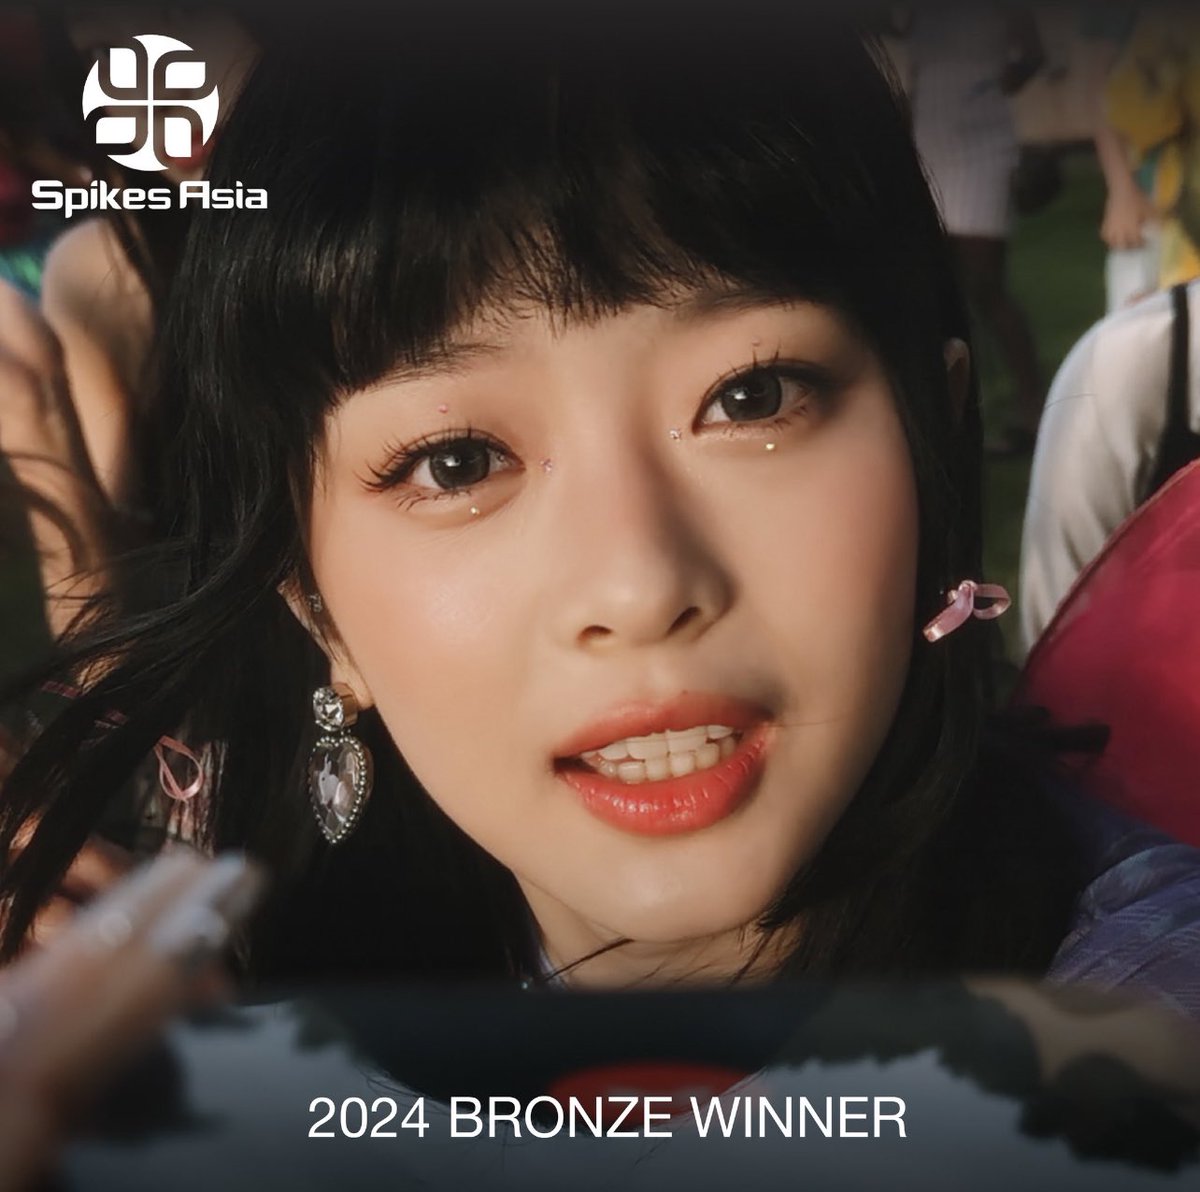 New Jeans’s ‘ETA’ Music Video was the  Bronze Winner in the ‘Brand or Product Integration into Music Content’ Category at the #SpikesAsia2024 Awards. 

#NewJeans #뉴진스 #ETA